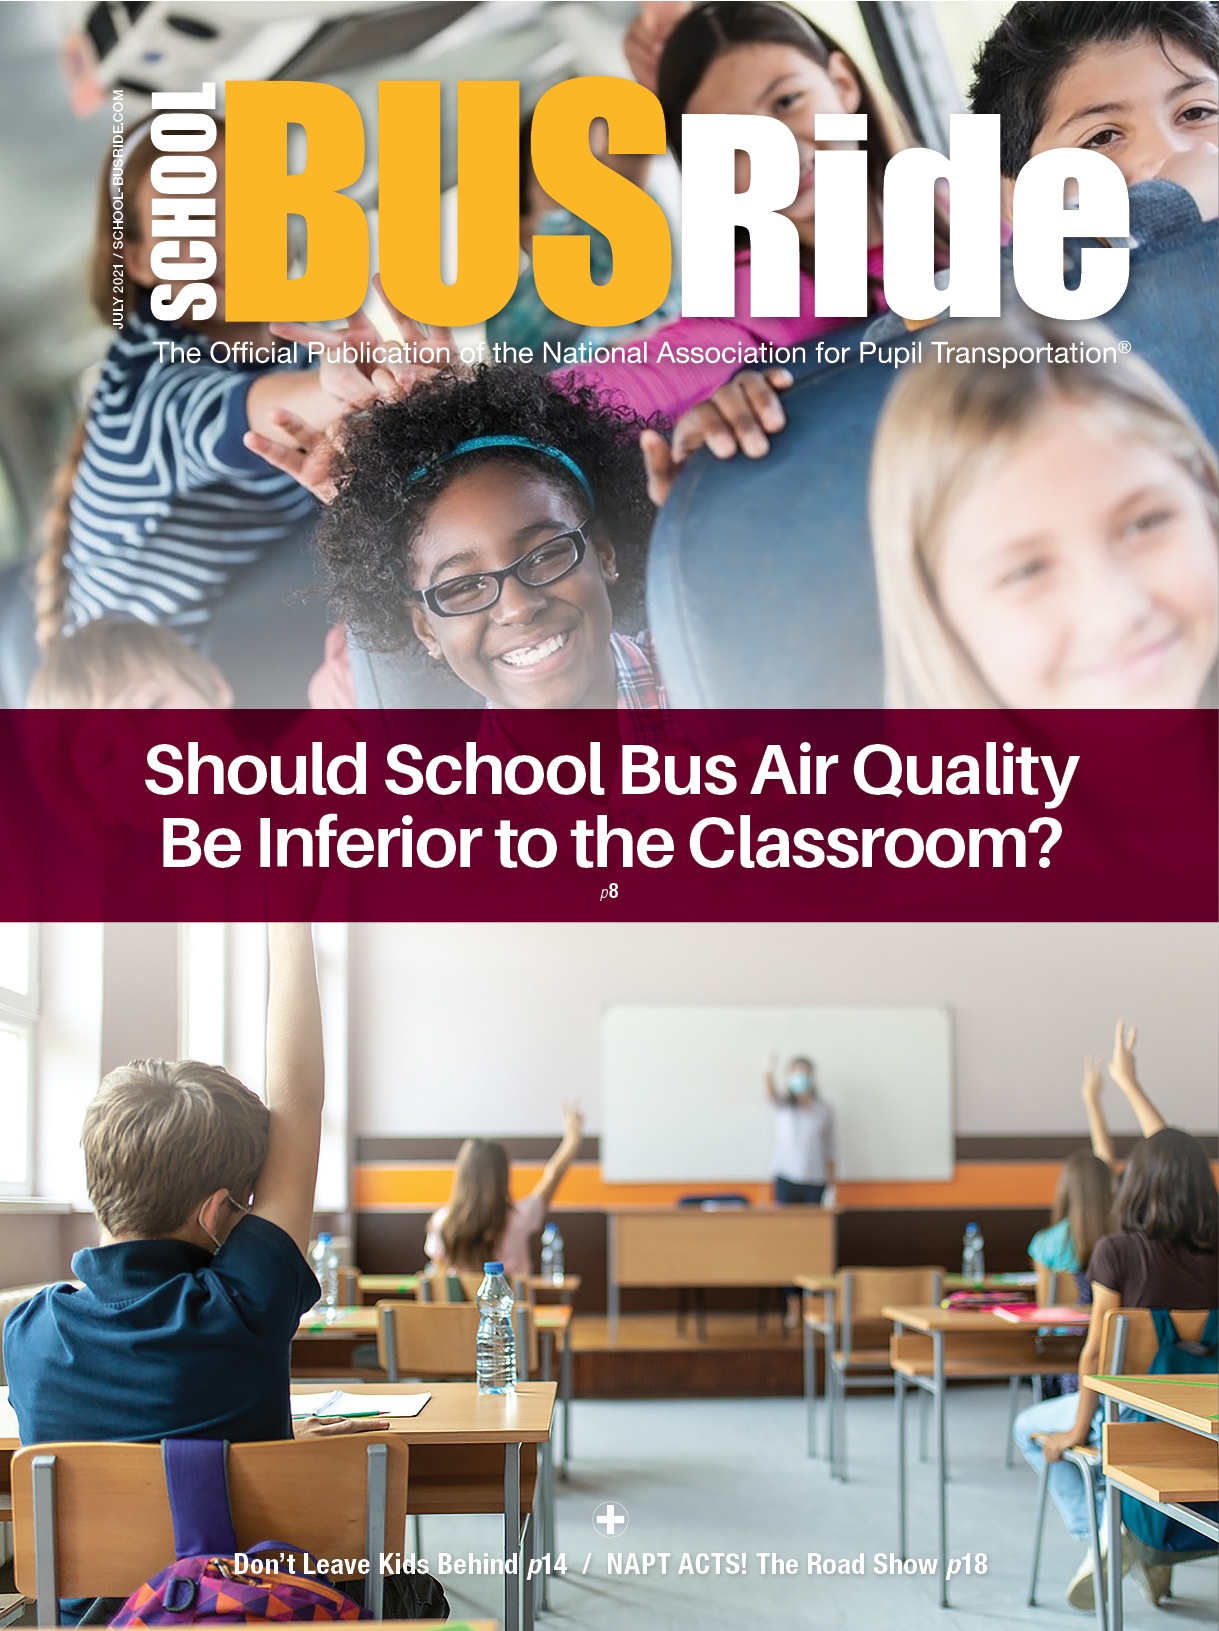 Should Air Quality on the Bus be Inferior to the Classroom?